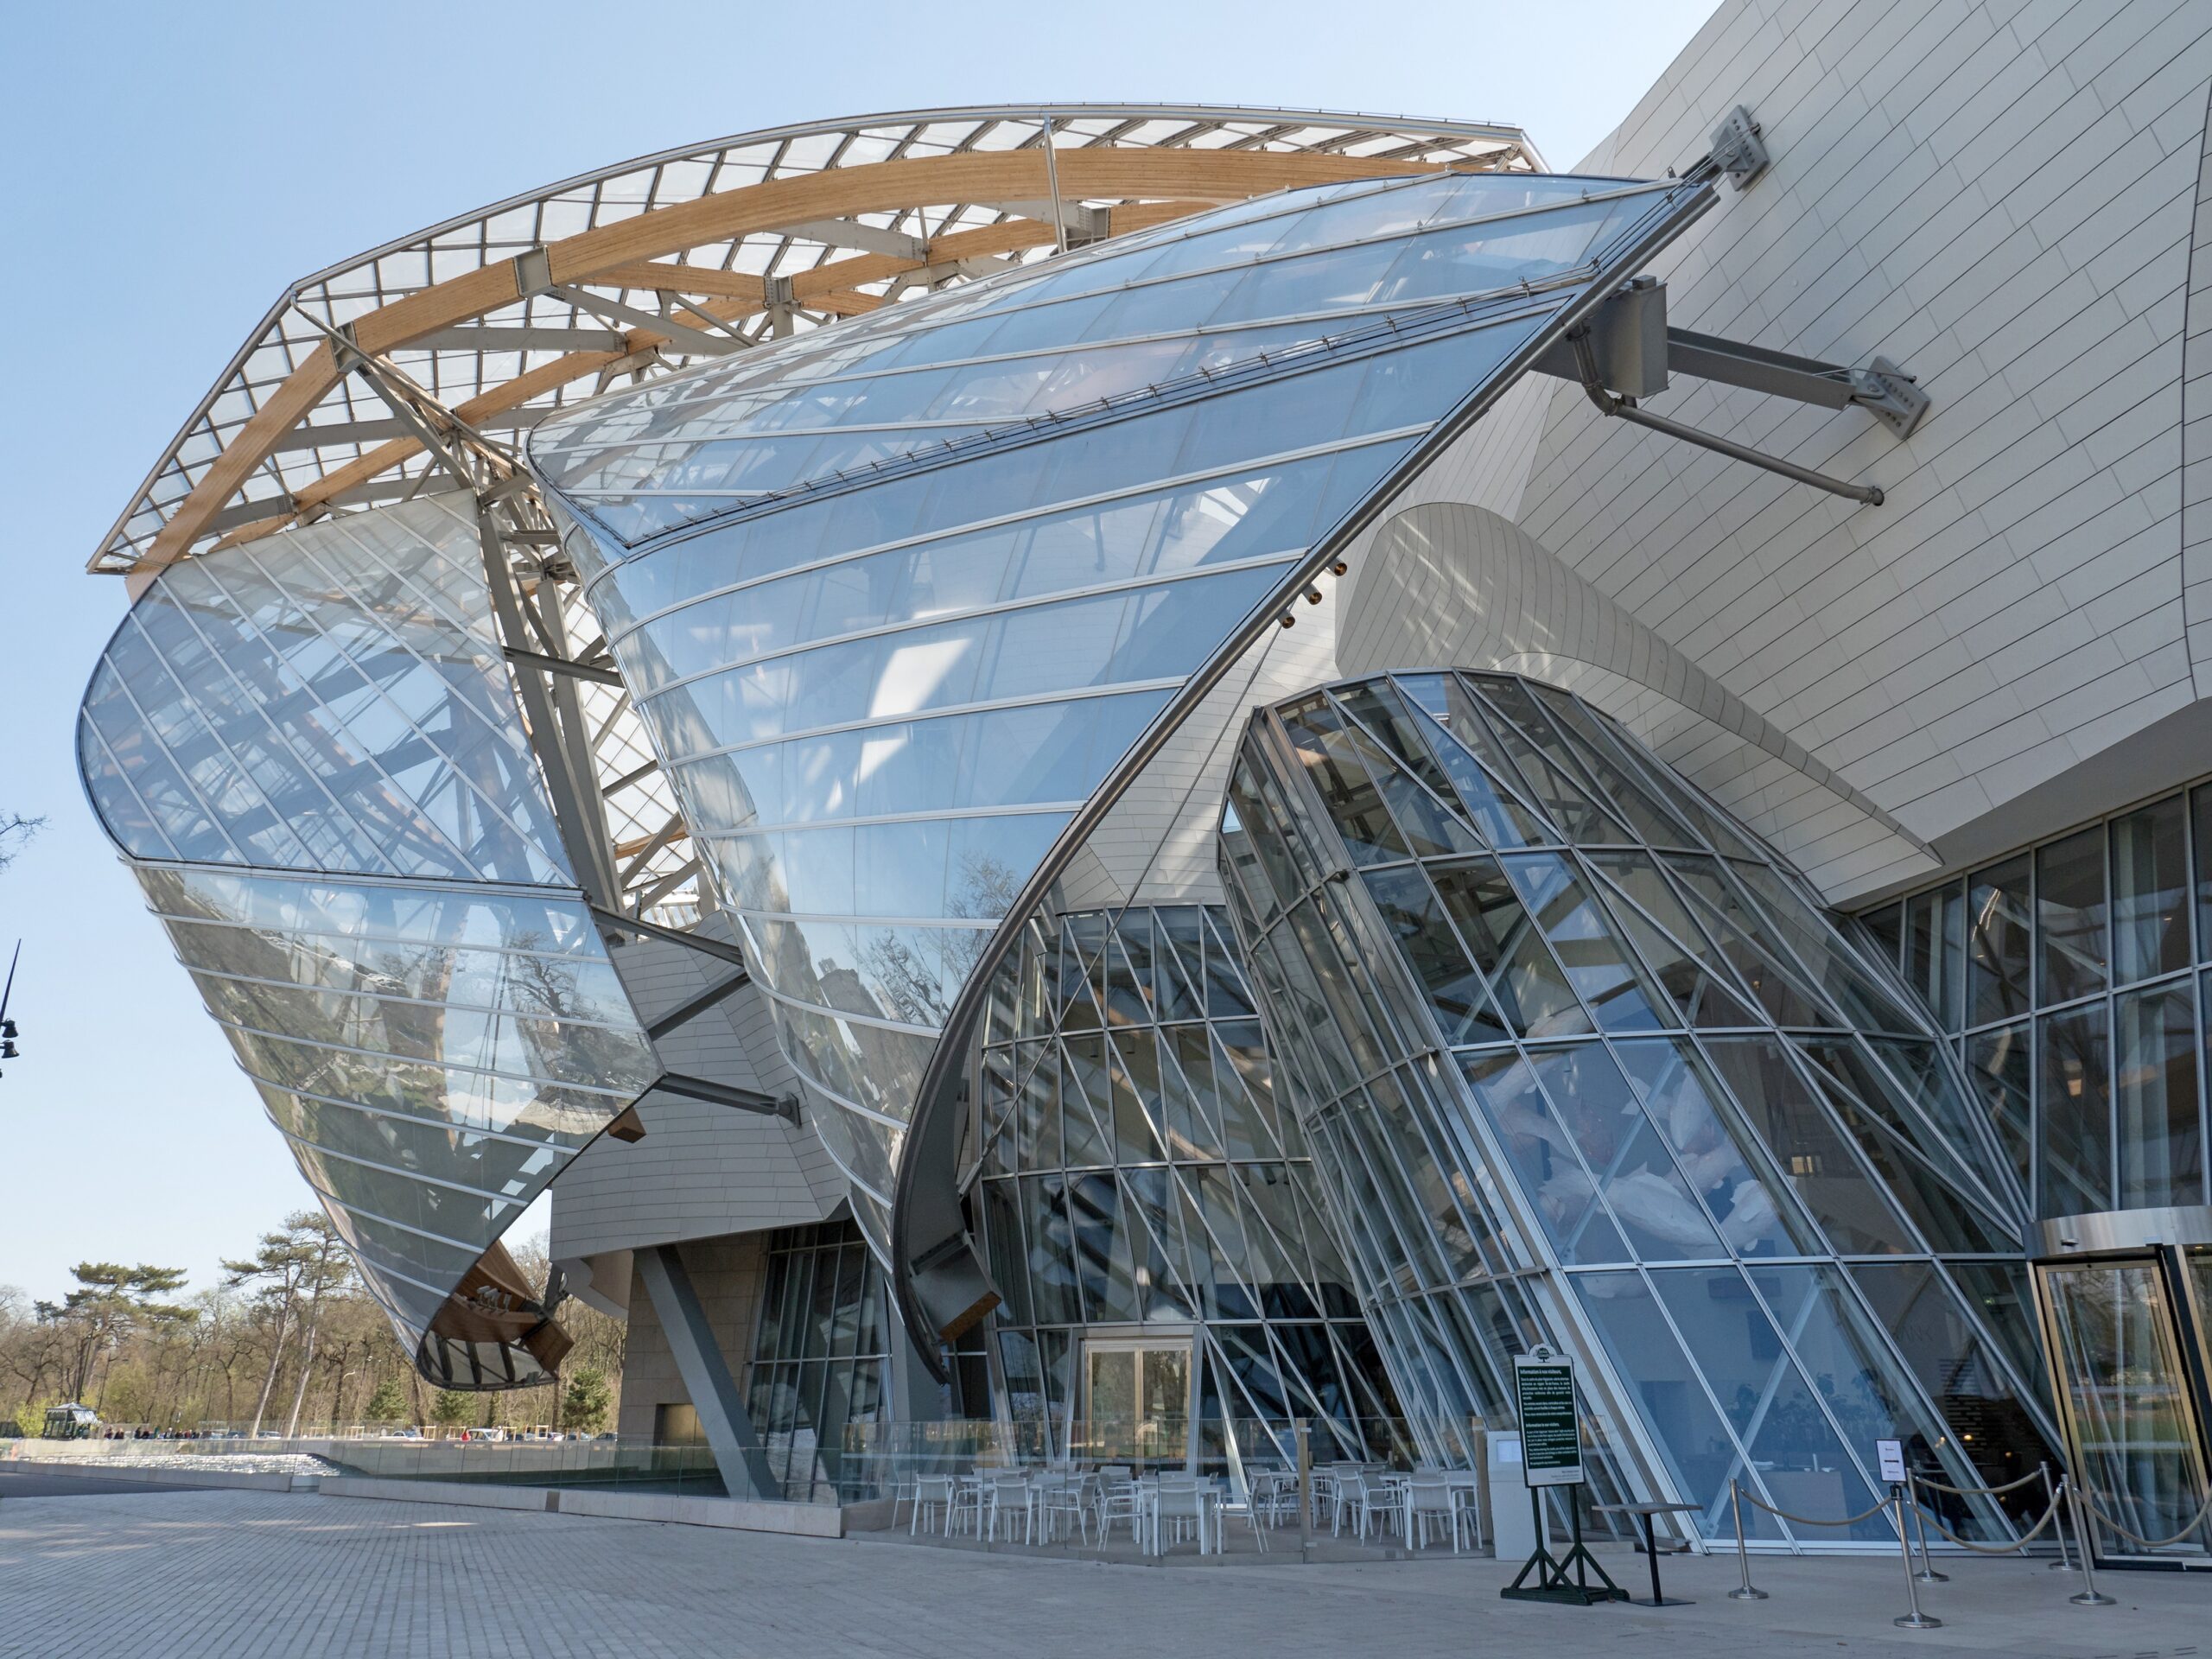 Guide To The Gehry-Designed Fondation Louis Vuitton In Paris - The  Geographical Cure